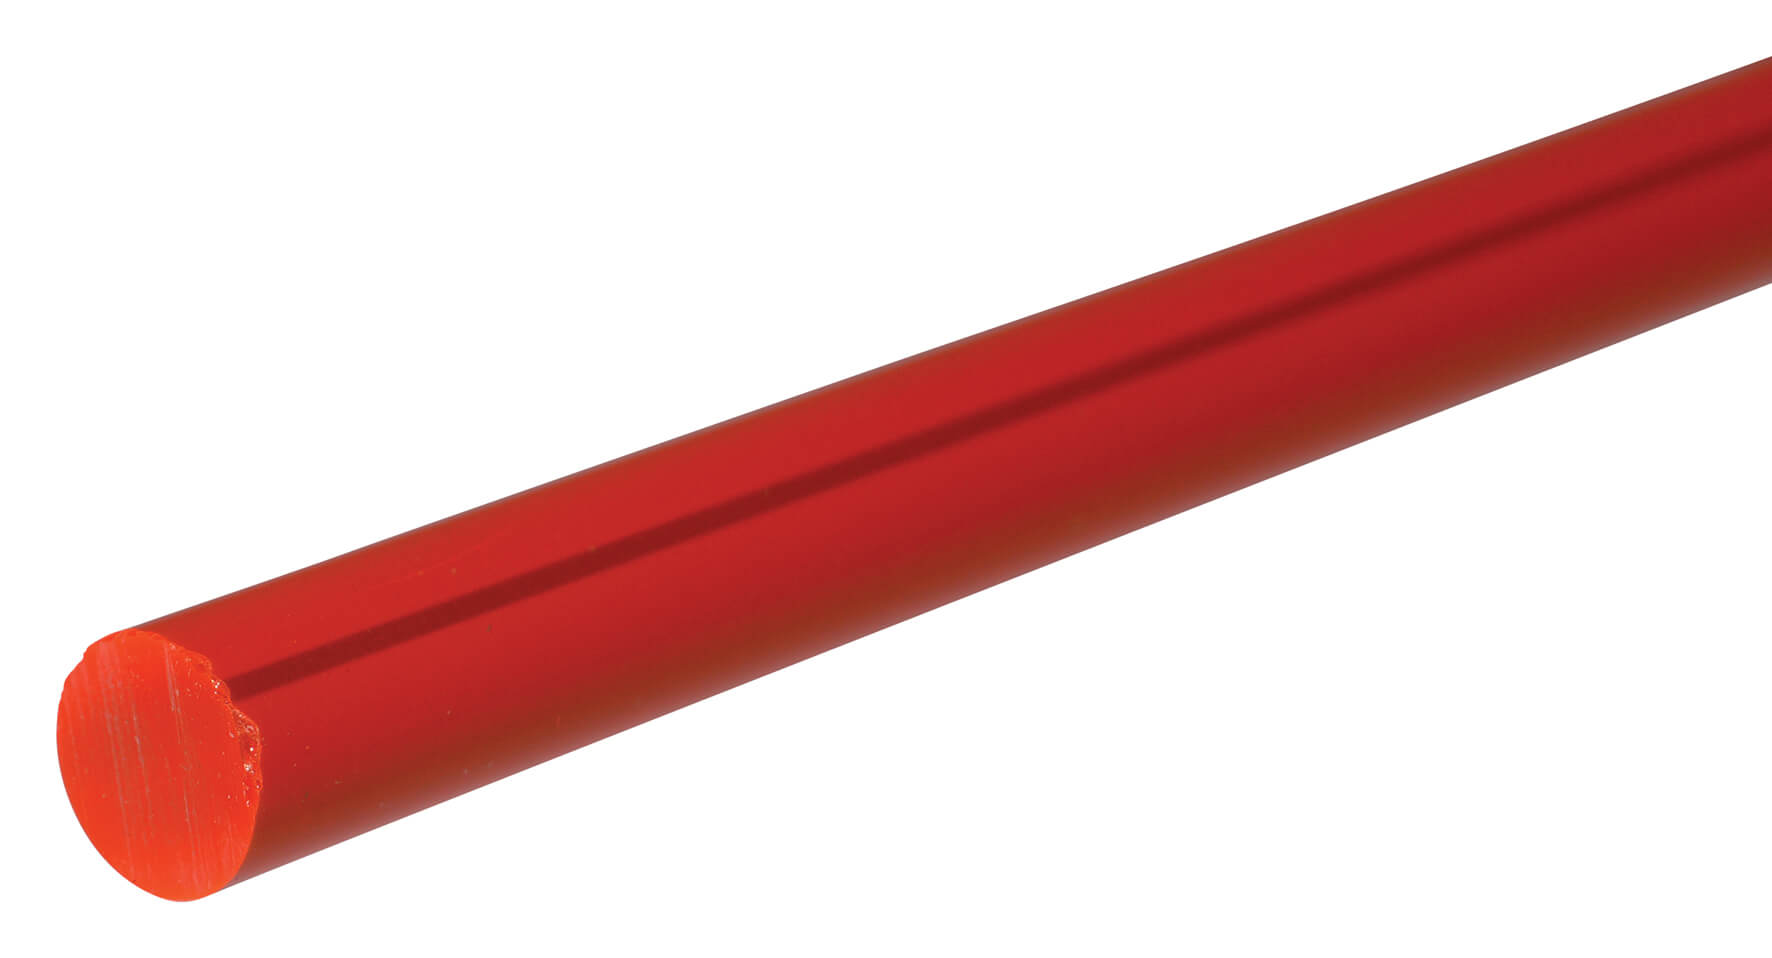 Fluorescent Acrylic Rod 10mm x 500mm - Red